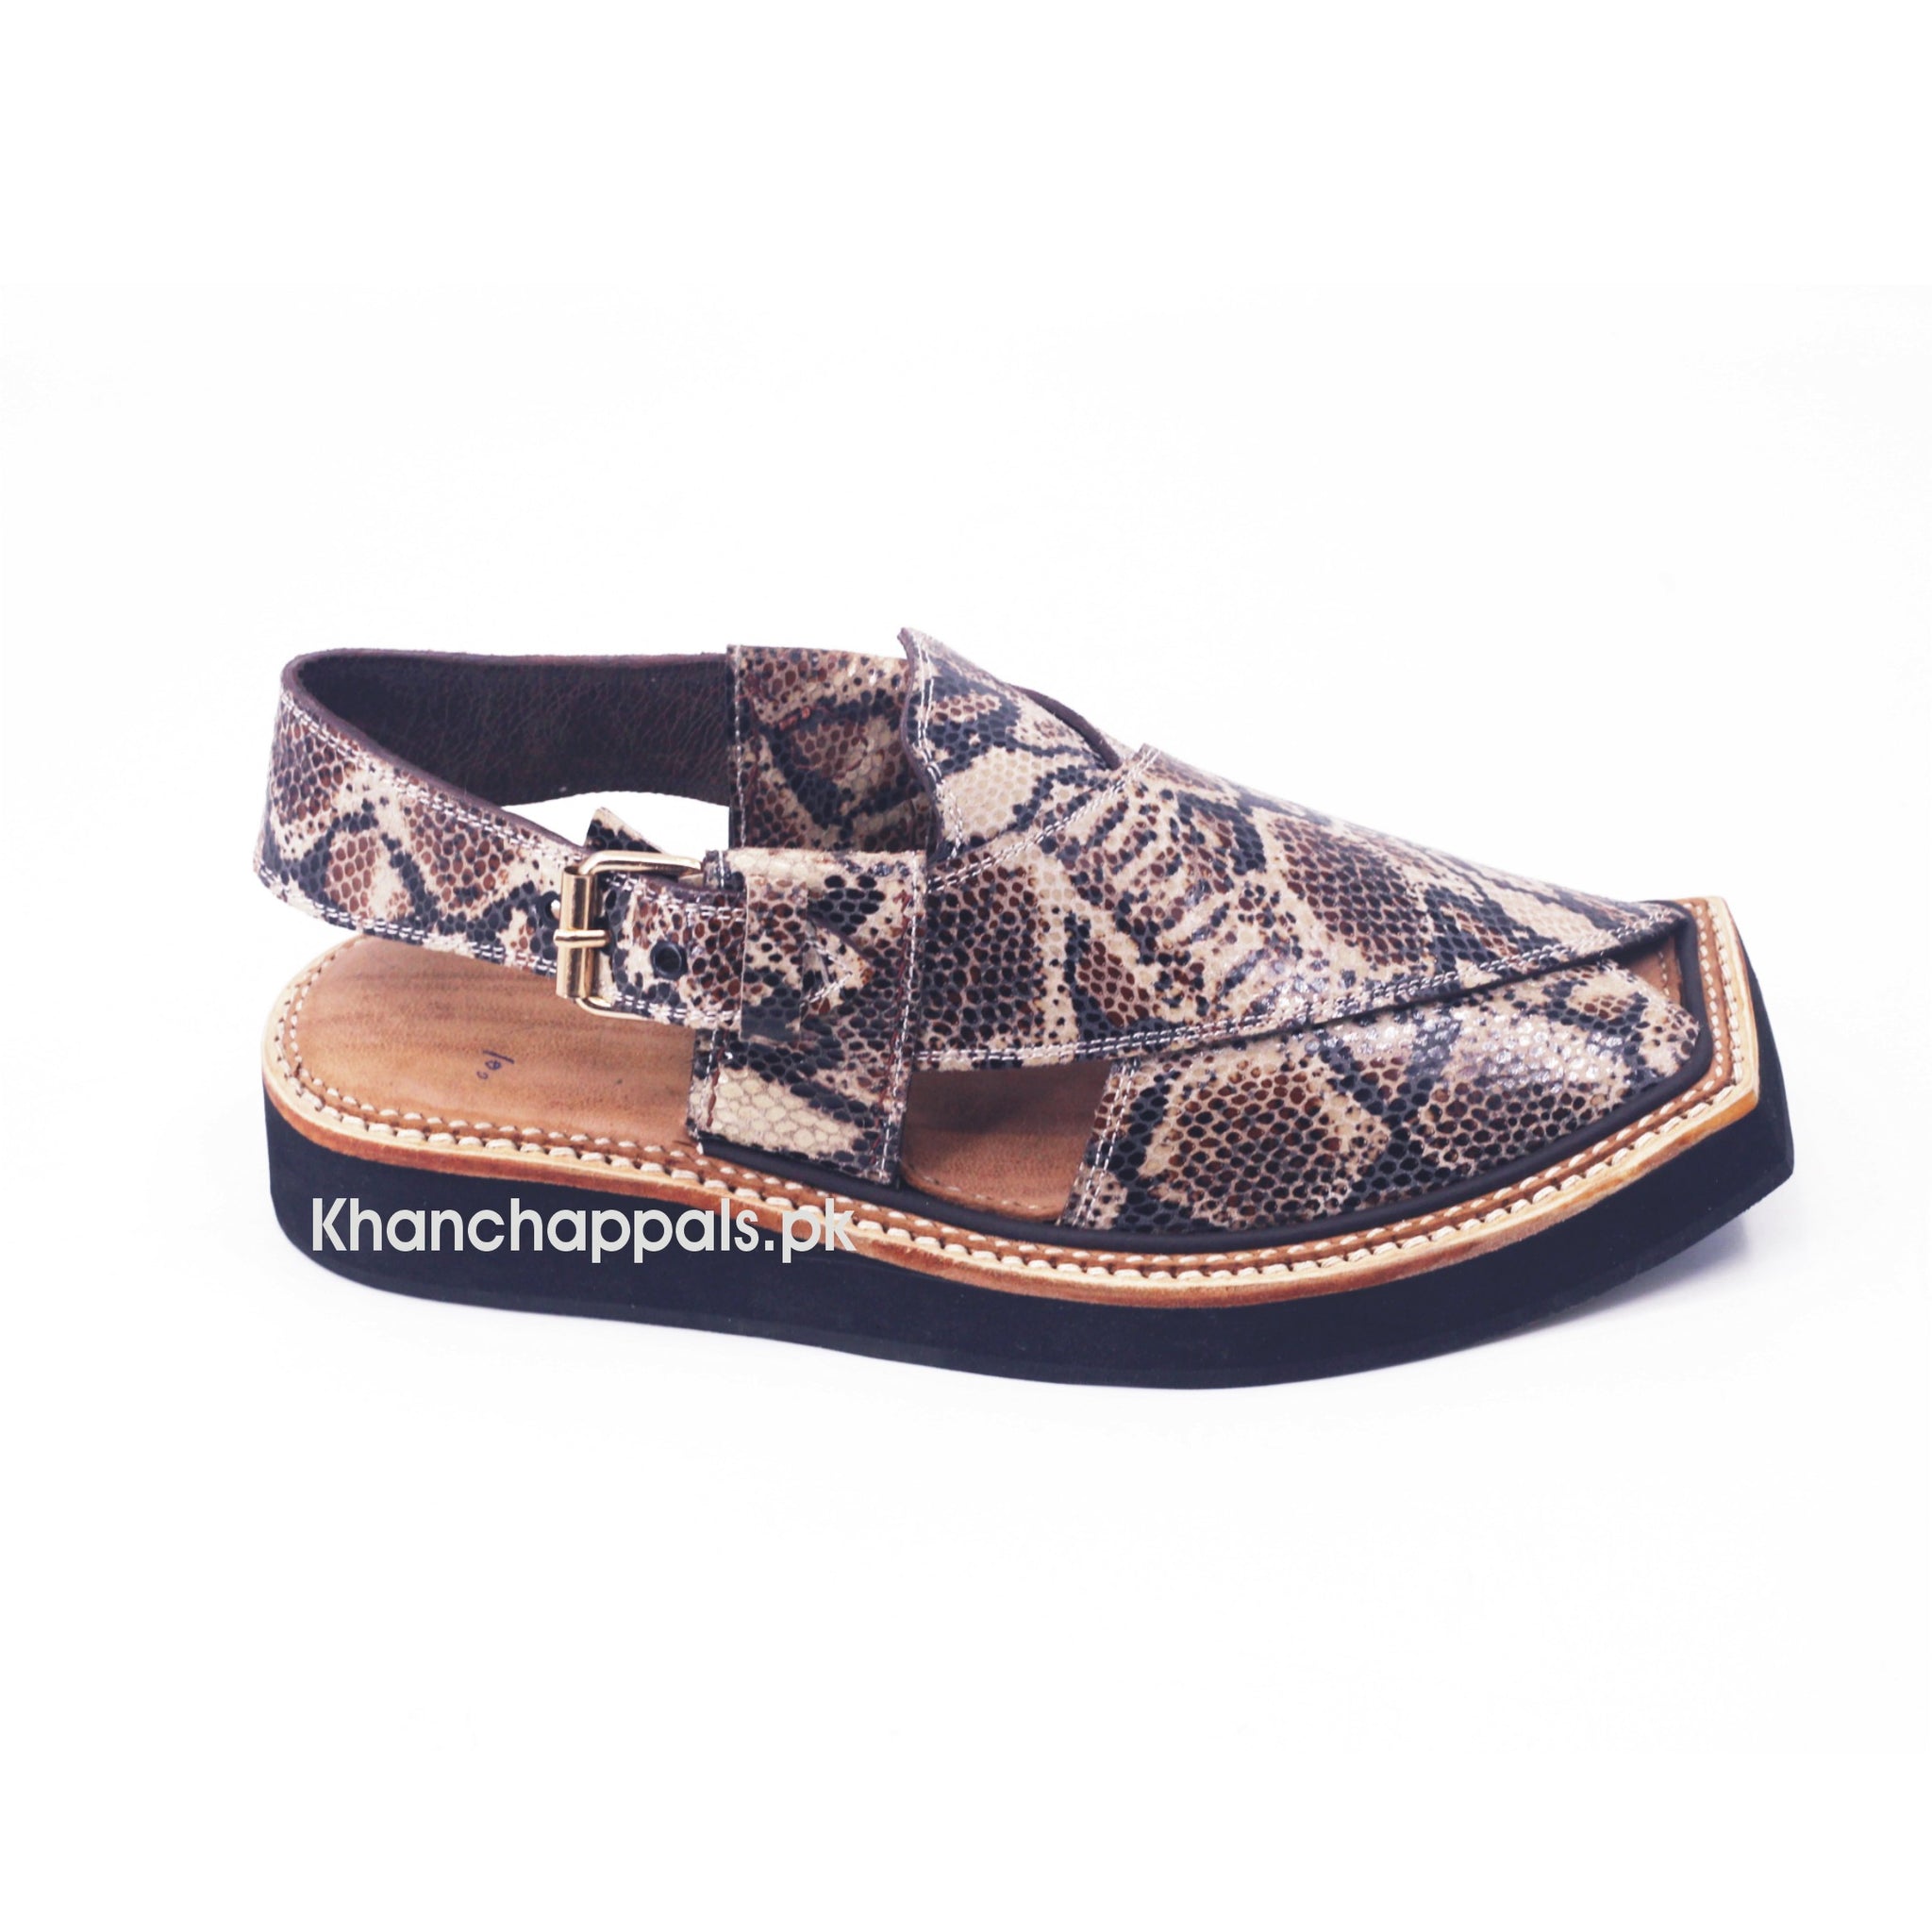 Special Snake Leather Kaptaan Chappal